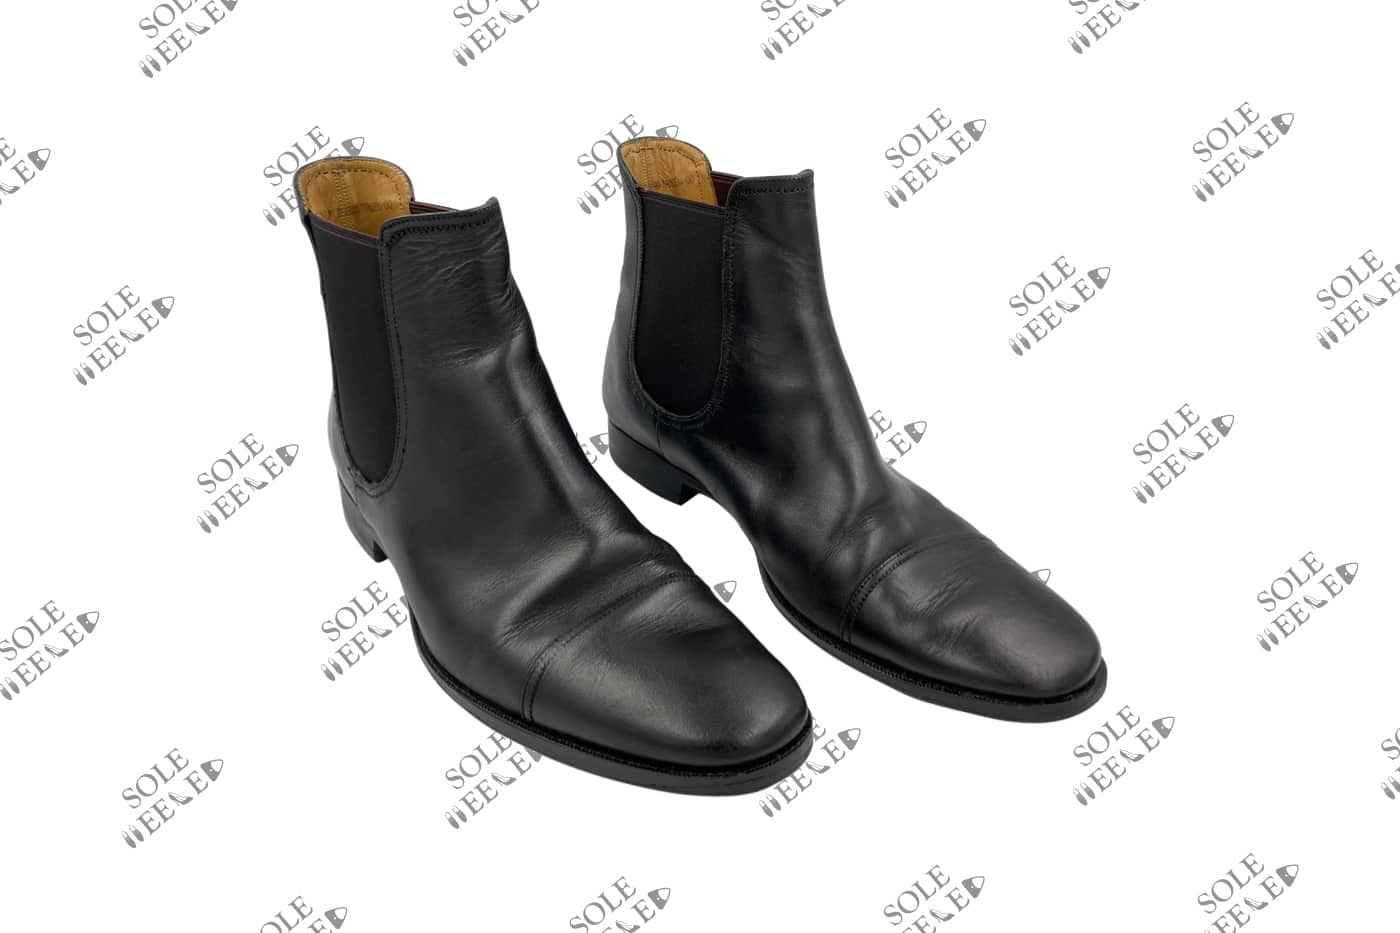 Bally Boot Elastic Gussets Replacement